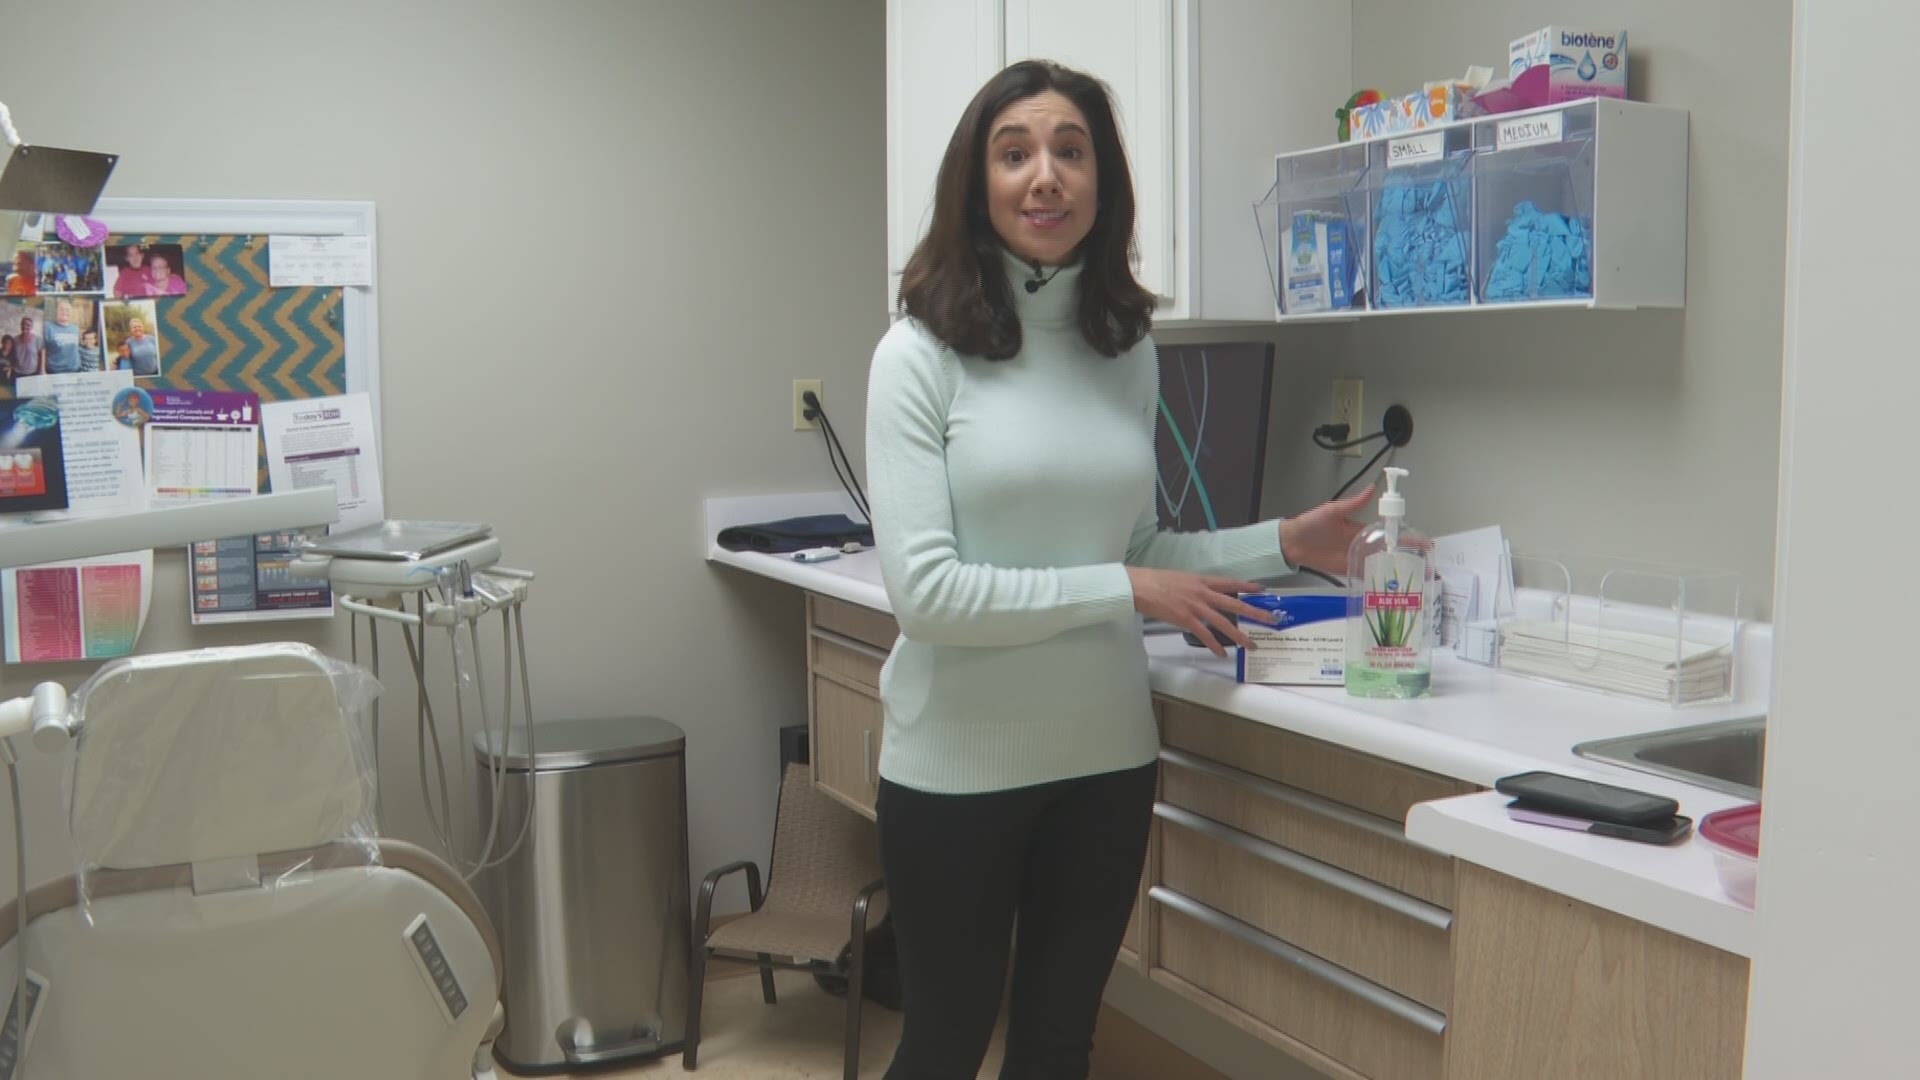 One dentist said her office is unable to purchase supplies need for everyday treatment.